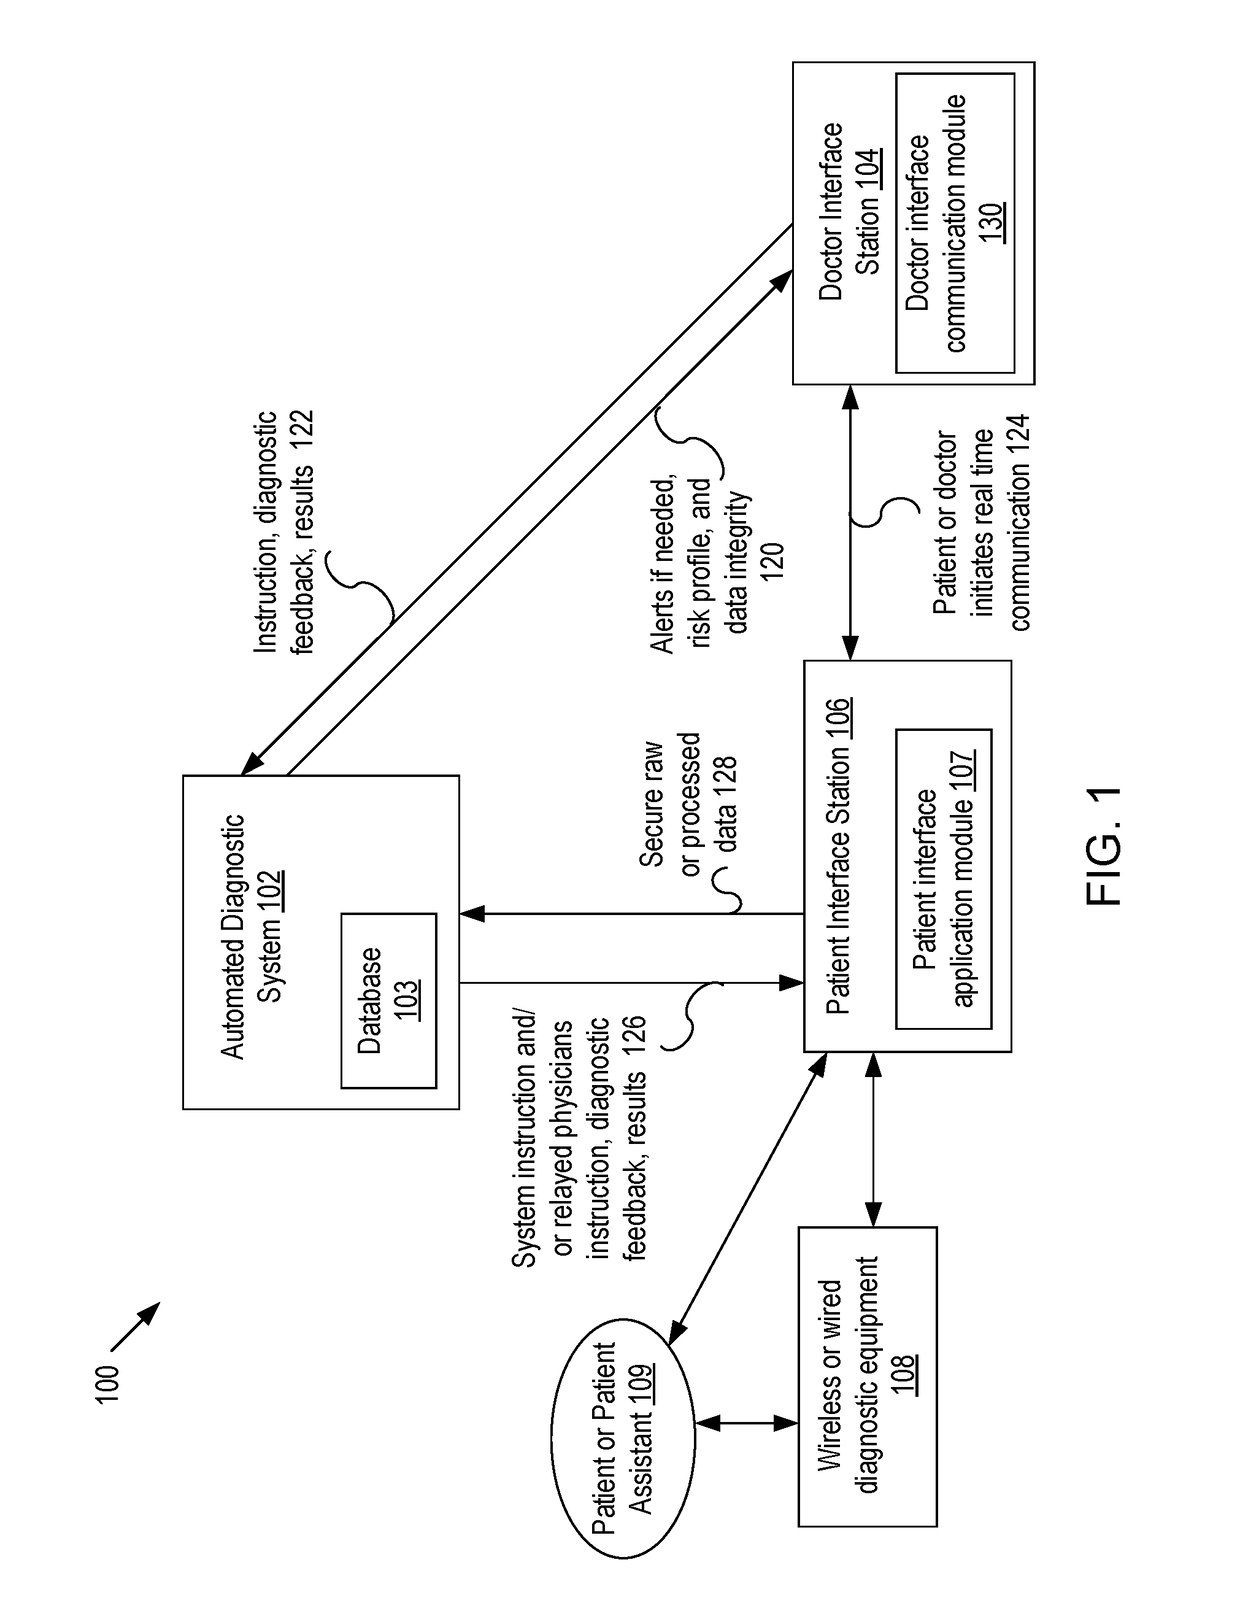 Systems and methods for automated medical diagnostics